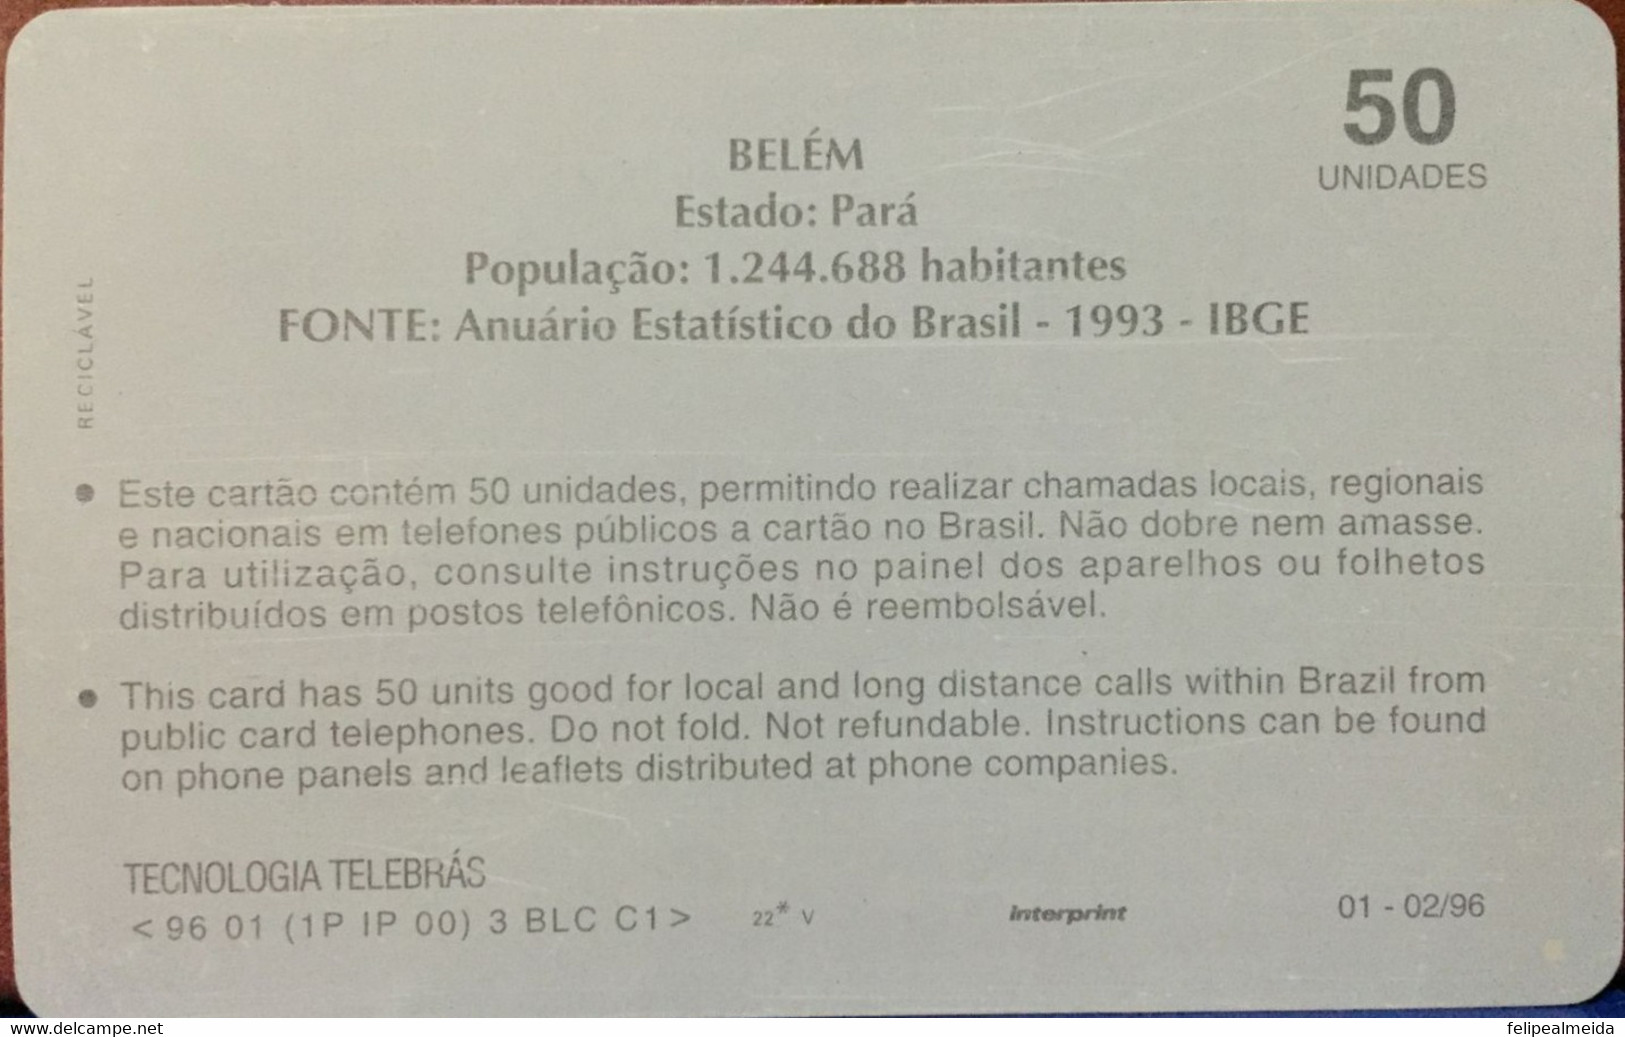 Phone Card Manufactured By Telebras In 1996 - Photo Belem Do Pará - Pará - Brazil - Statistical Yearbook Of Brazil 1993 - Kultur